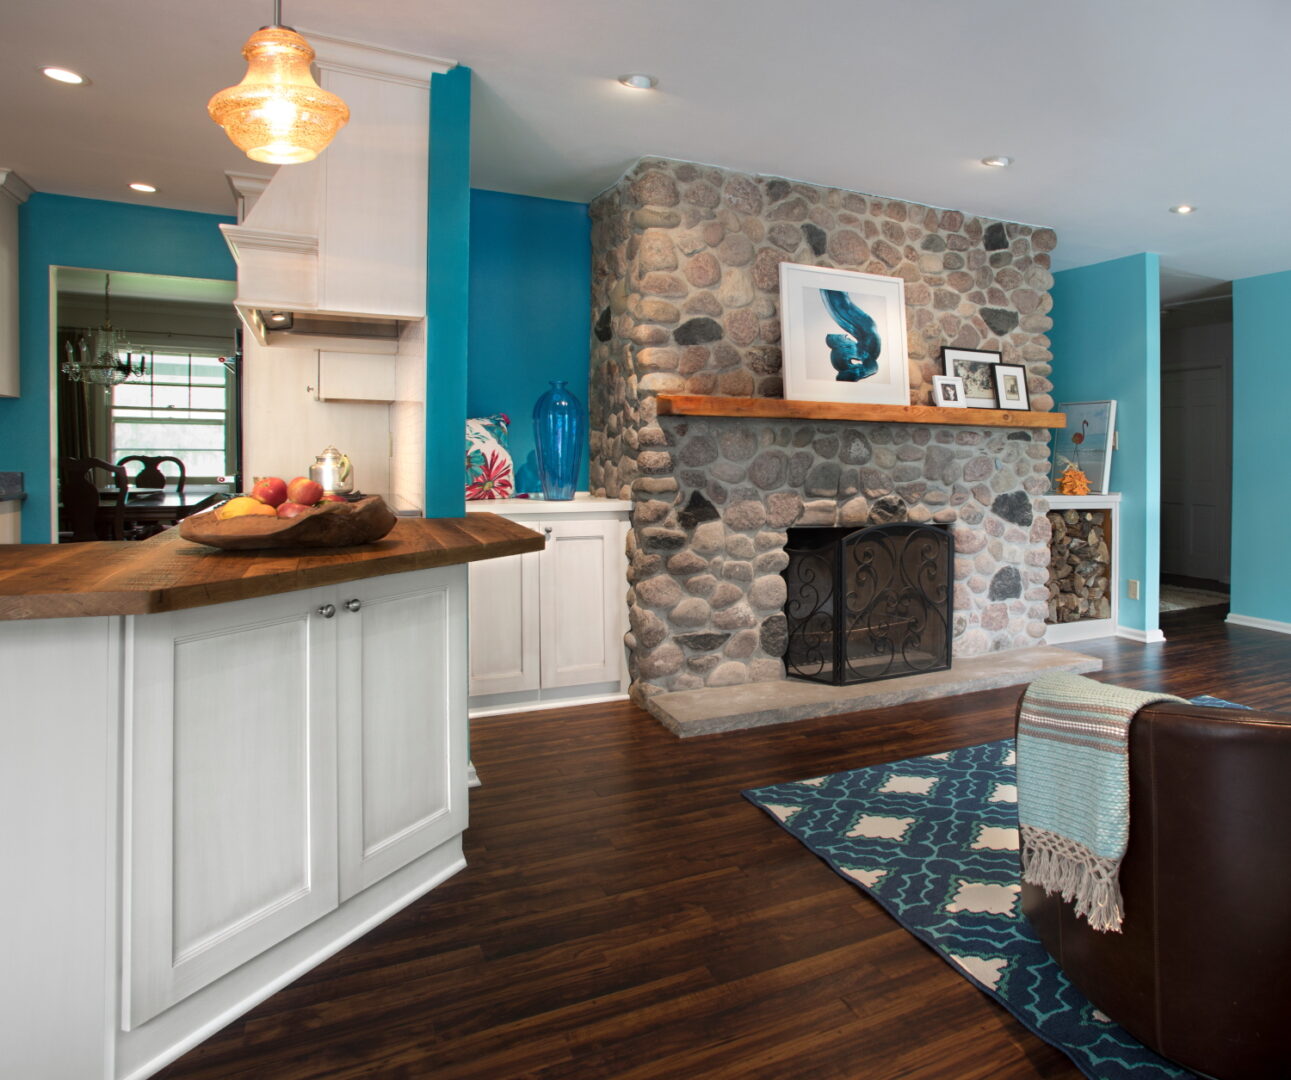 A look at the fireplace in the family room beside the kitchen